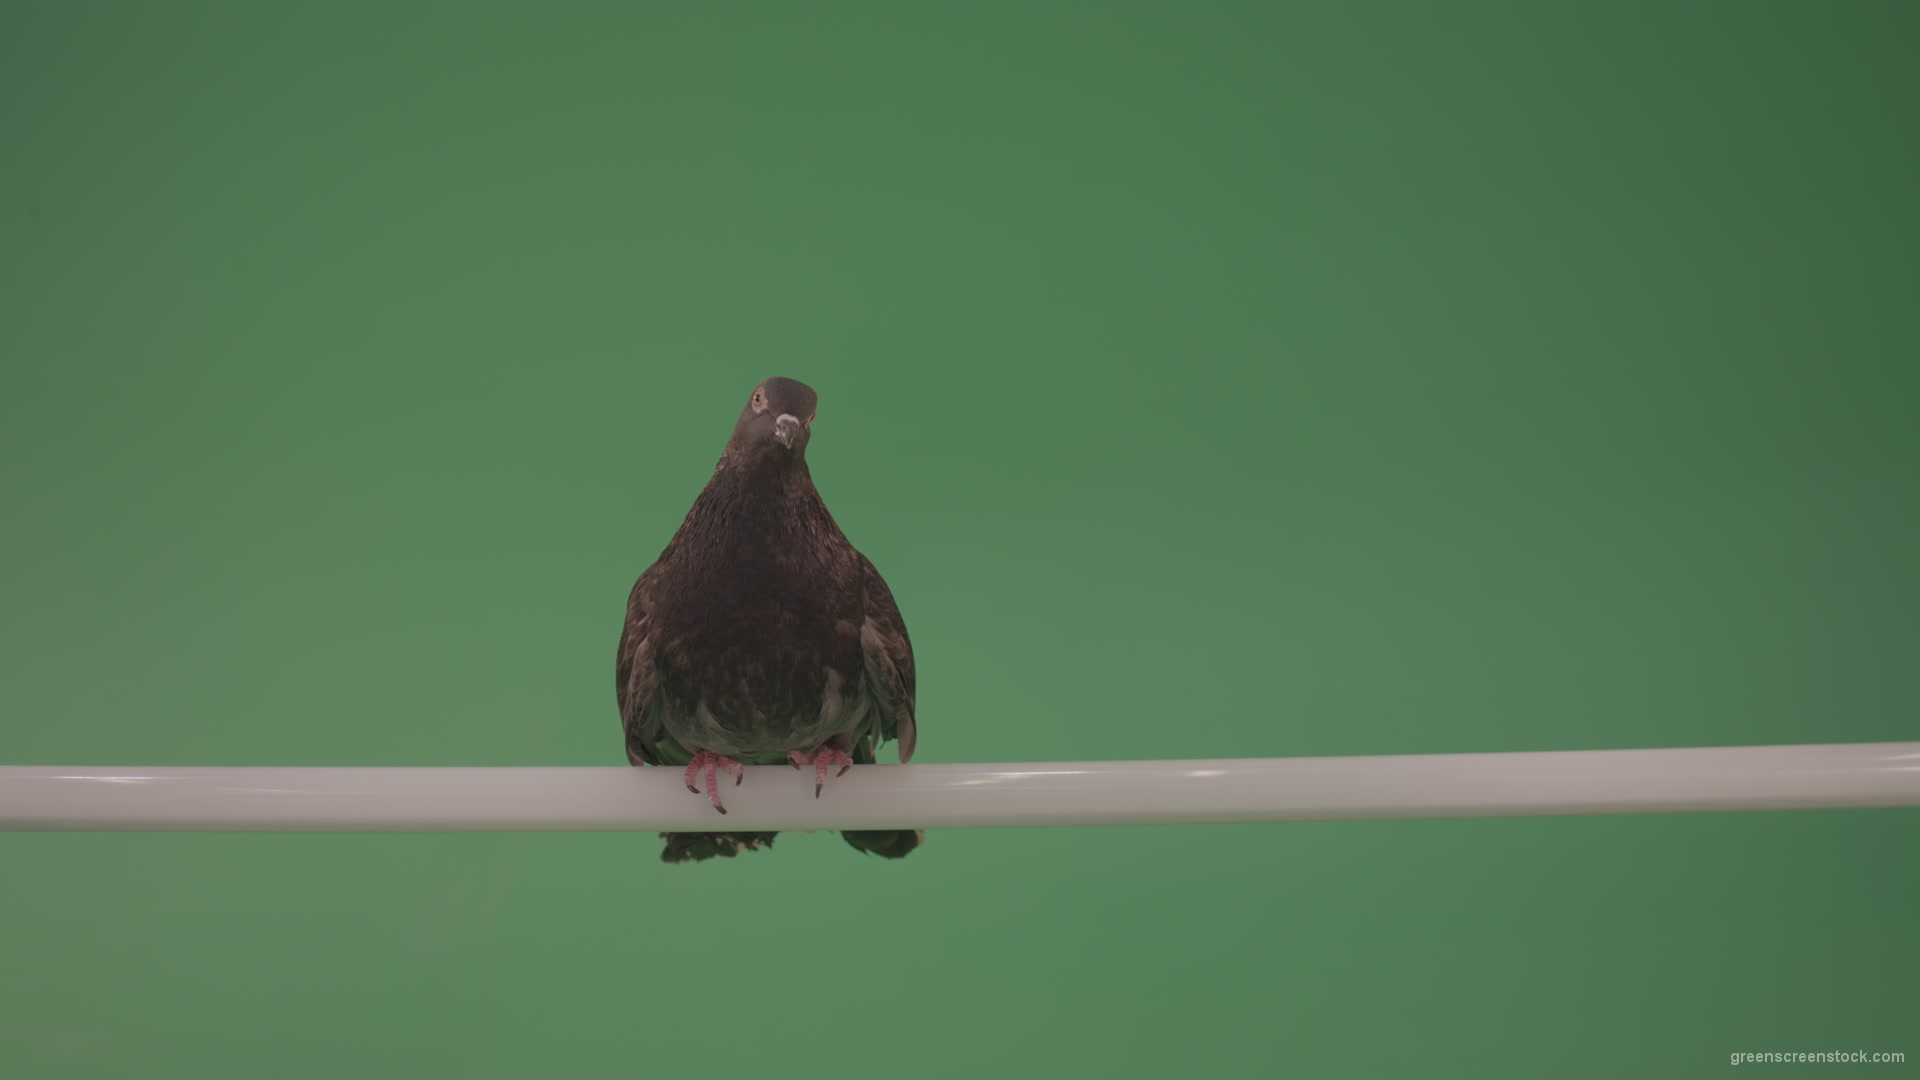 Dove-sitting-on-a-branch-in-the-city-isolated-in-green-screen-studio_002 Green Screen Stock